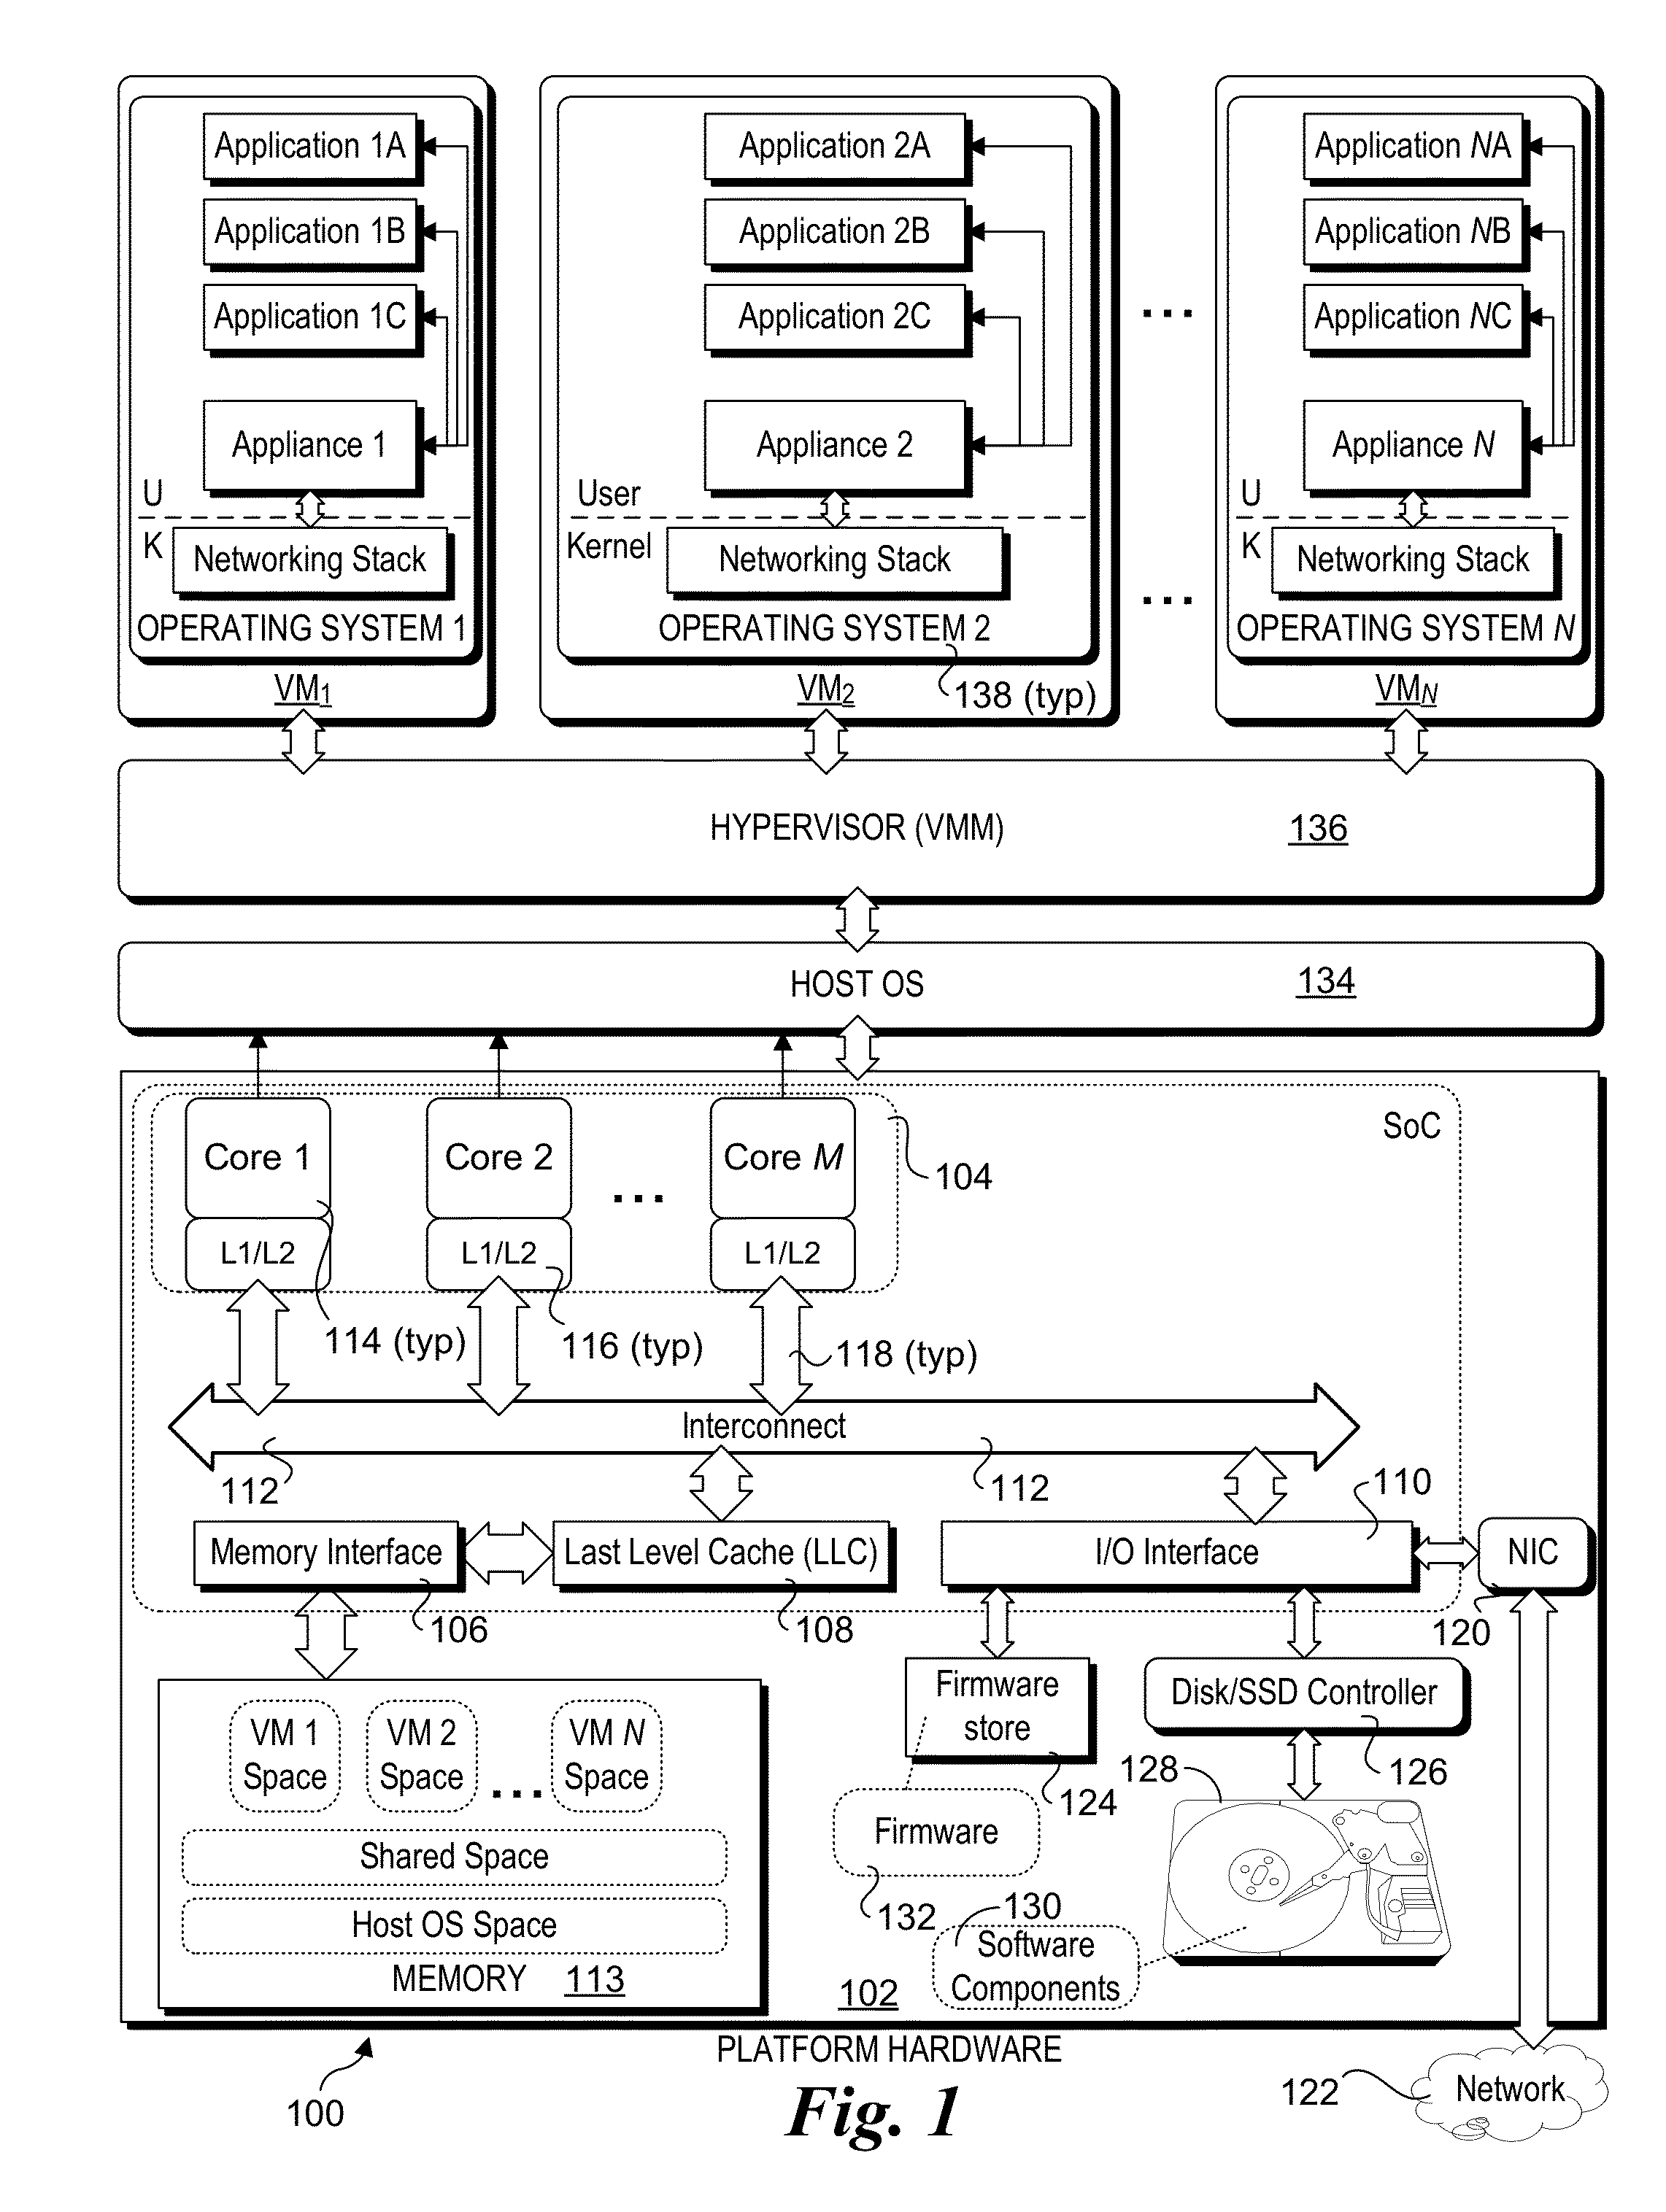 Hardware/software co-optimization to improve performance and energy for inter-vm communication for nfvs and other producer-consumer workloads